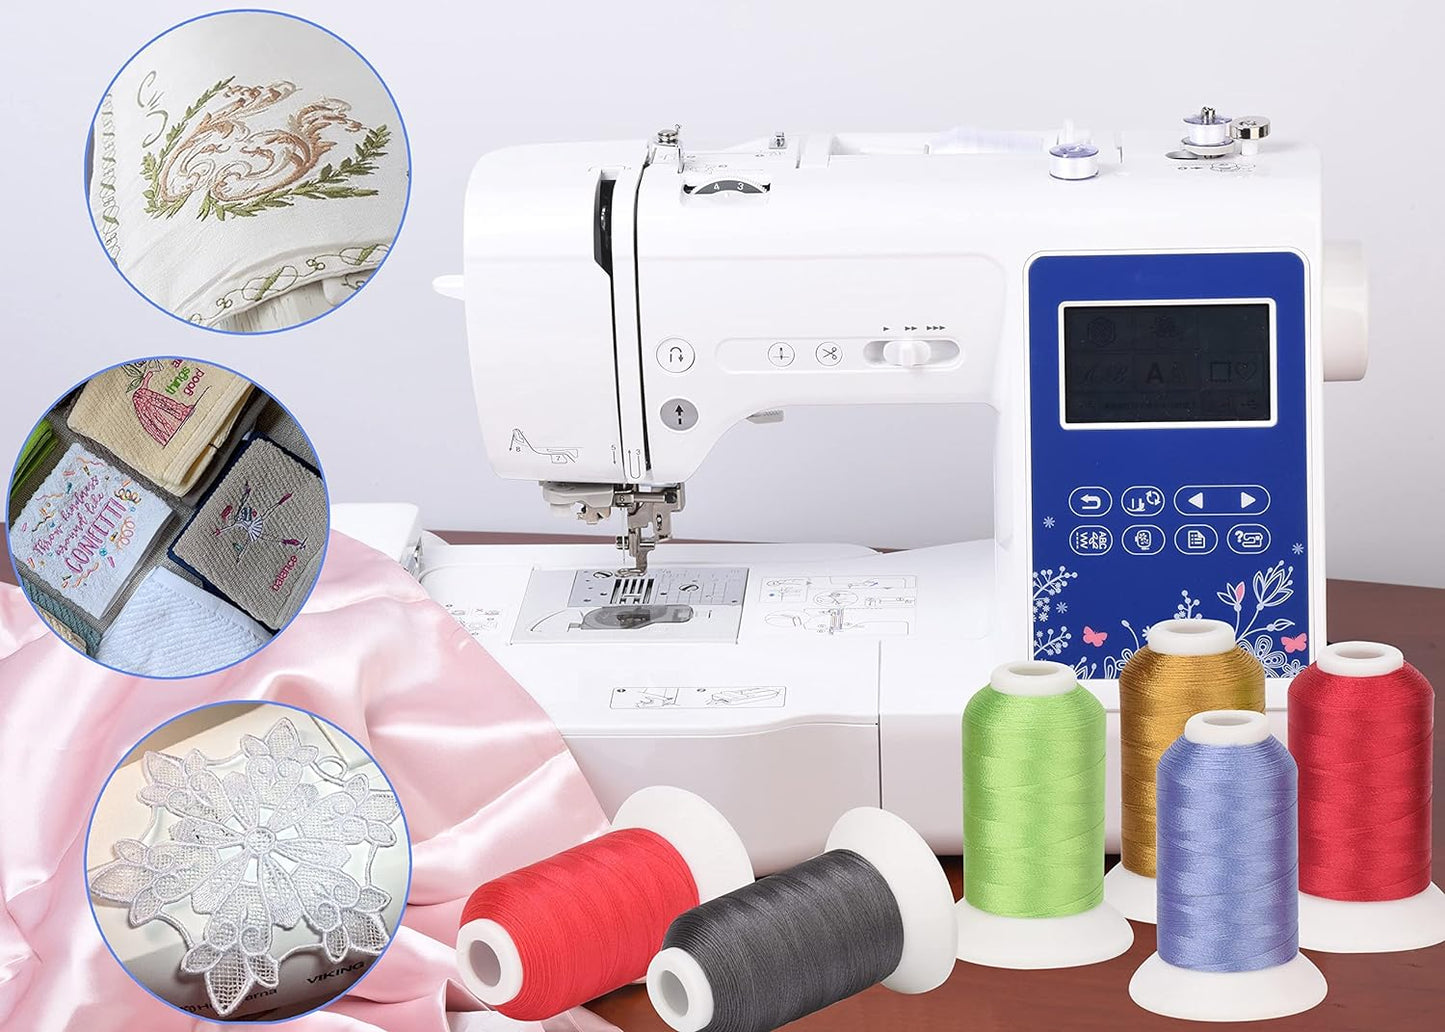 63 Brother Colors Polyester Embroidery Machine Thread Kit 40 Weight for Brother Babylock Janome Singer Pfaff Husqvarna Bernina Embroidery and Sewing Machines 550Y